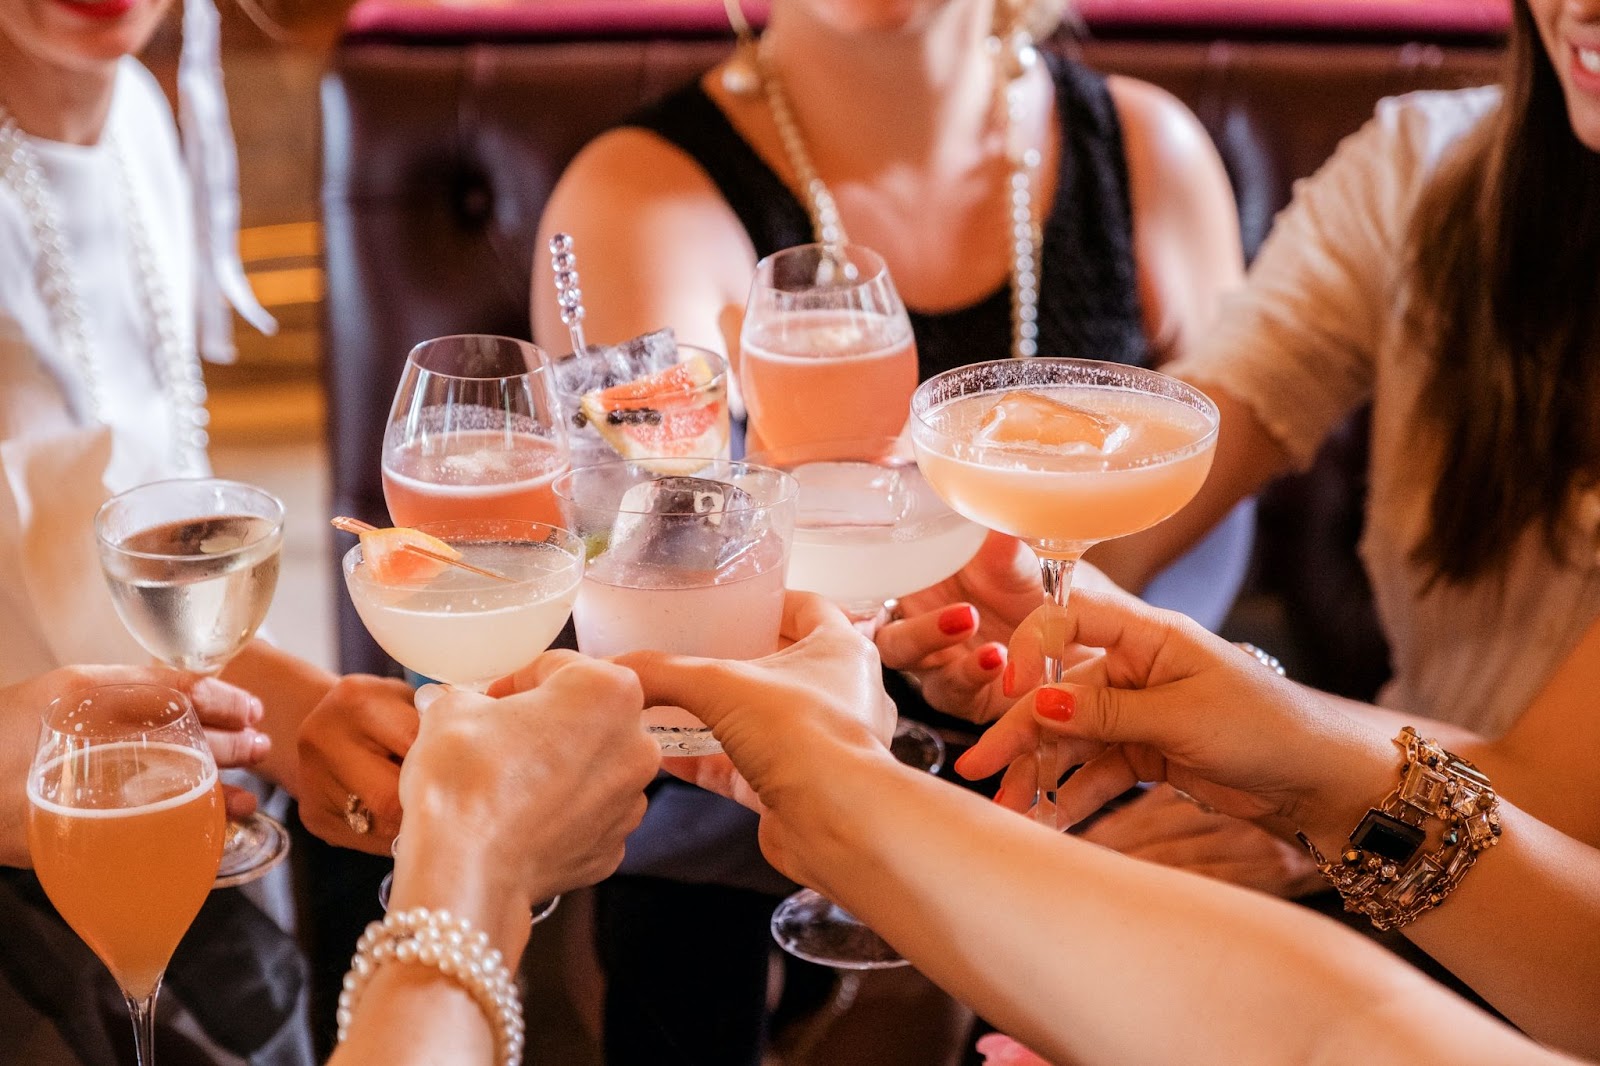 A group of women cheerfully clinking glasses filled with various pink and orange cocktails, symbolizing friendship and celebration.